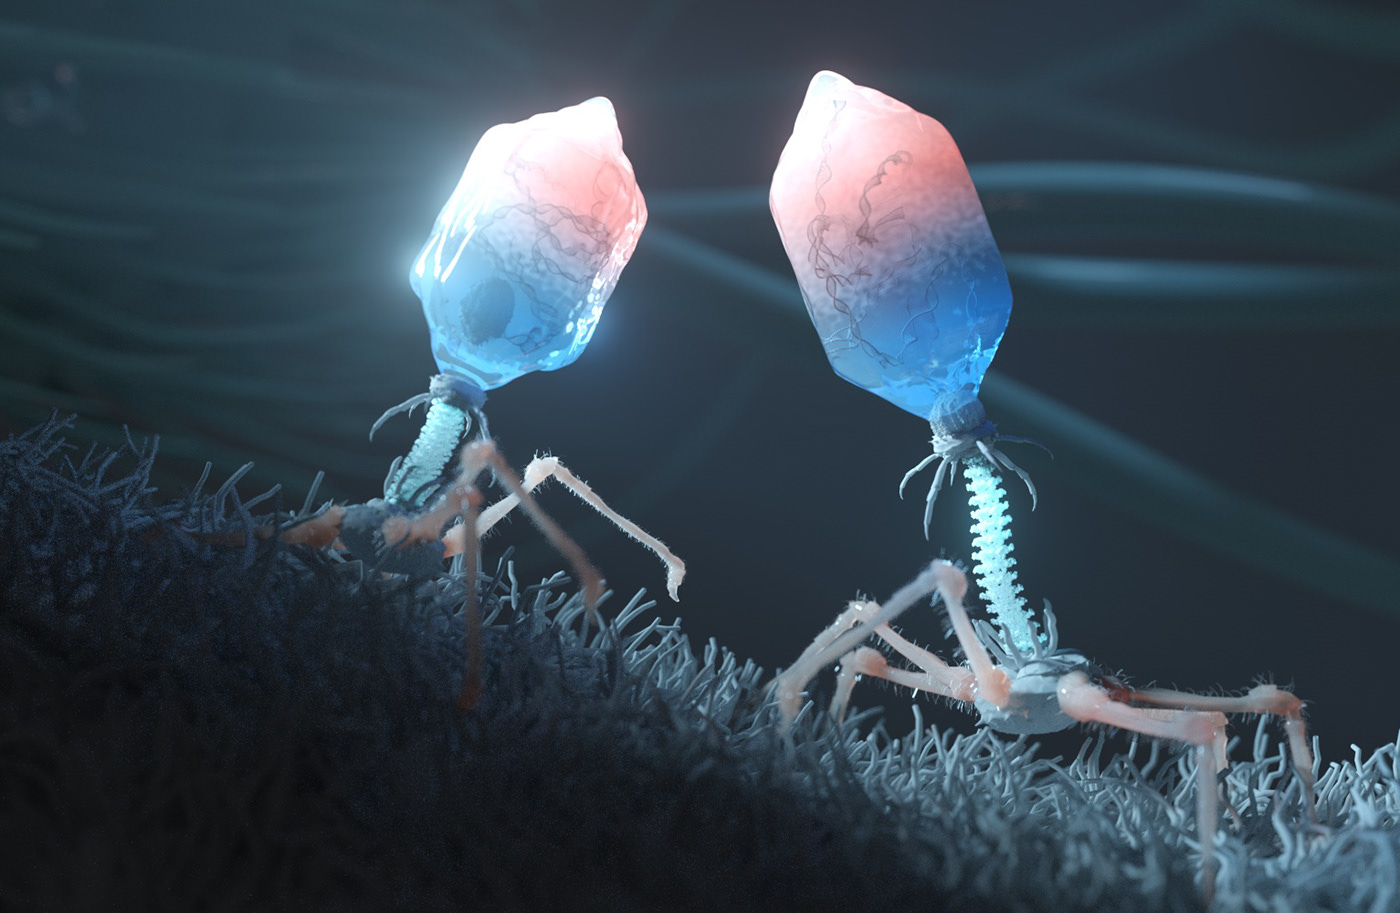 Bacteriophage on Behance6ad5be91989697.5e403bc231bf4.jpg